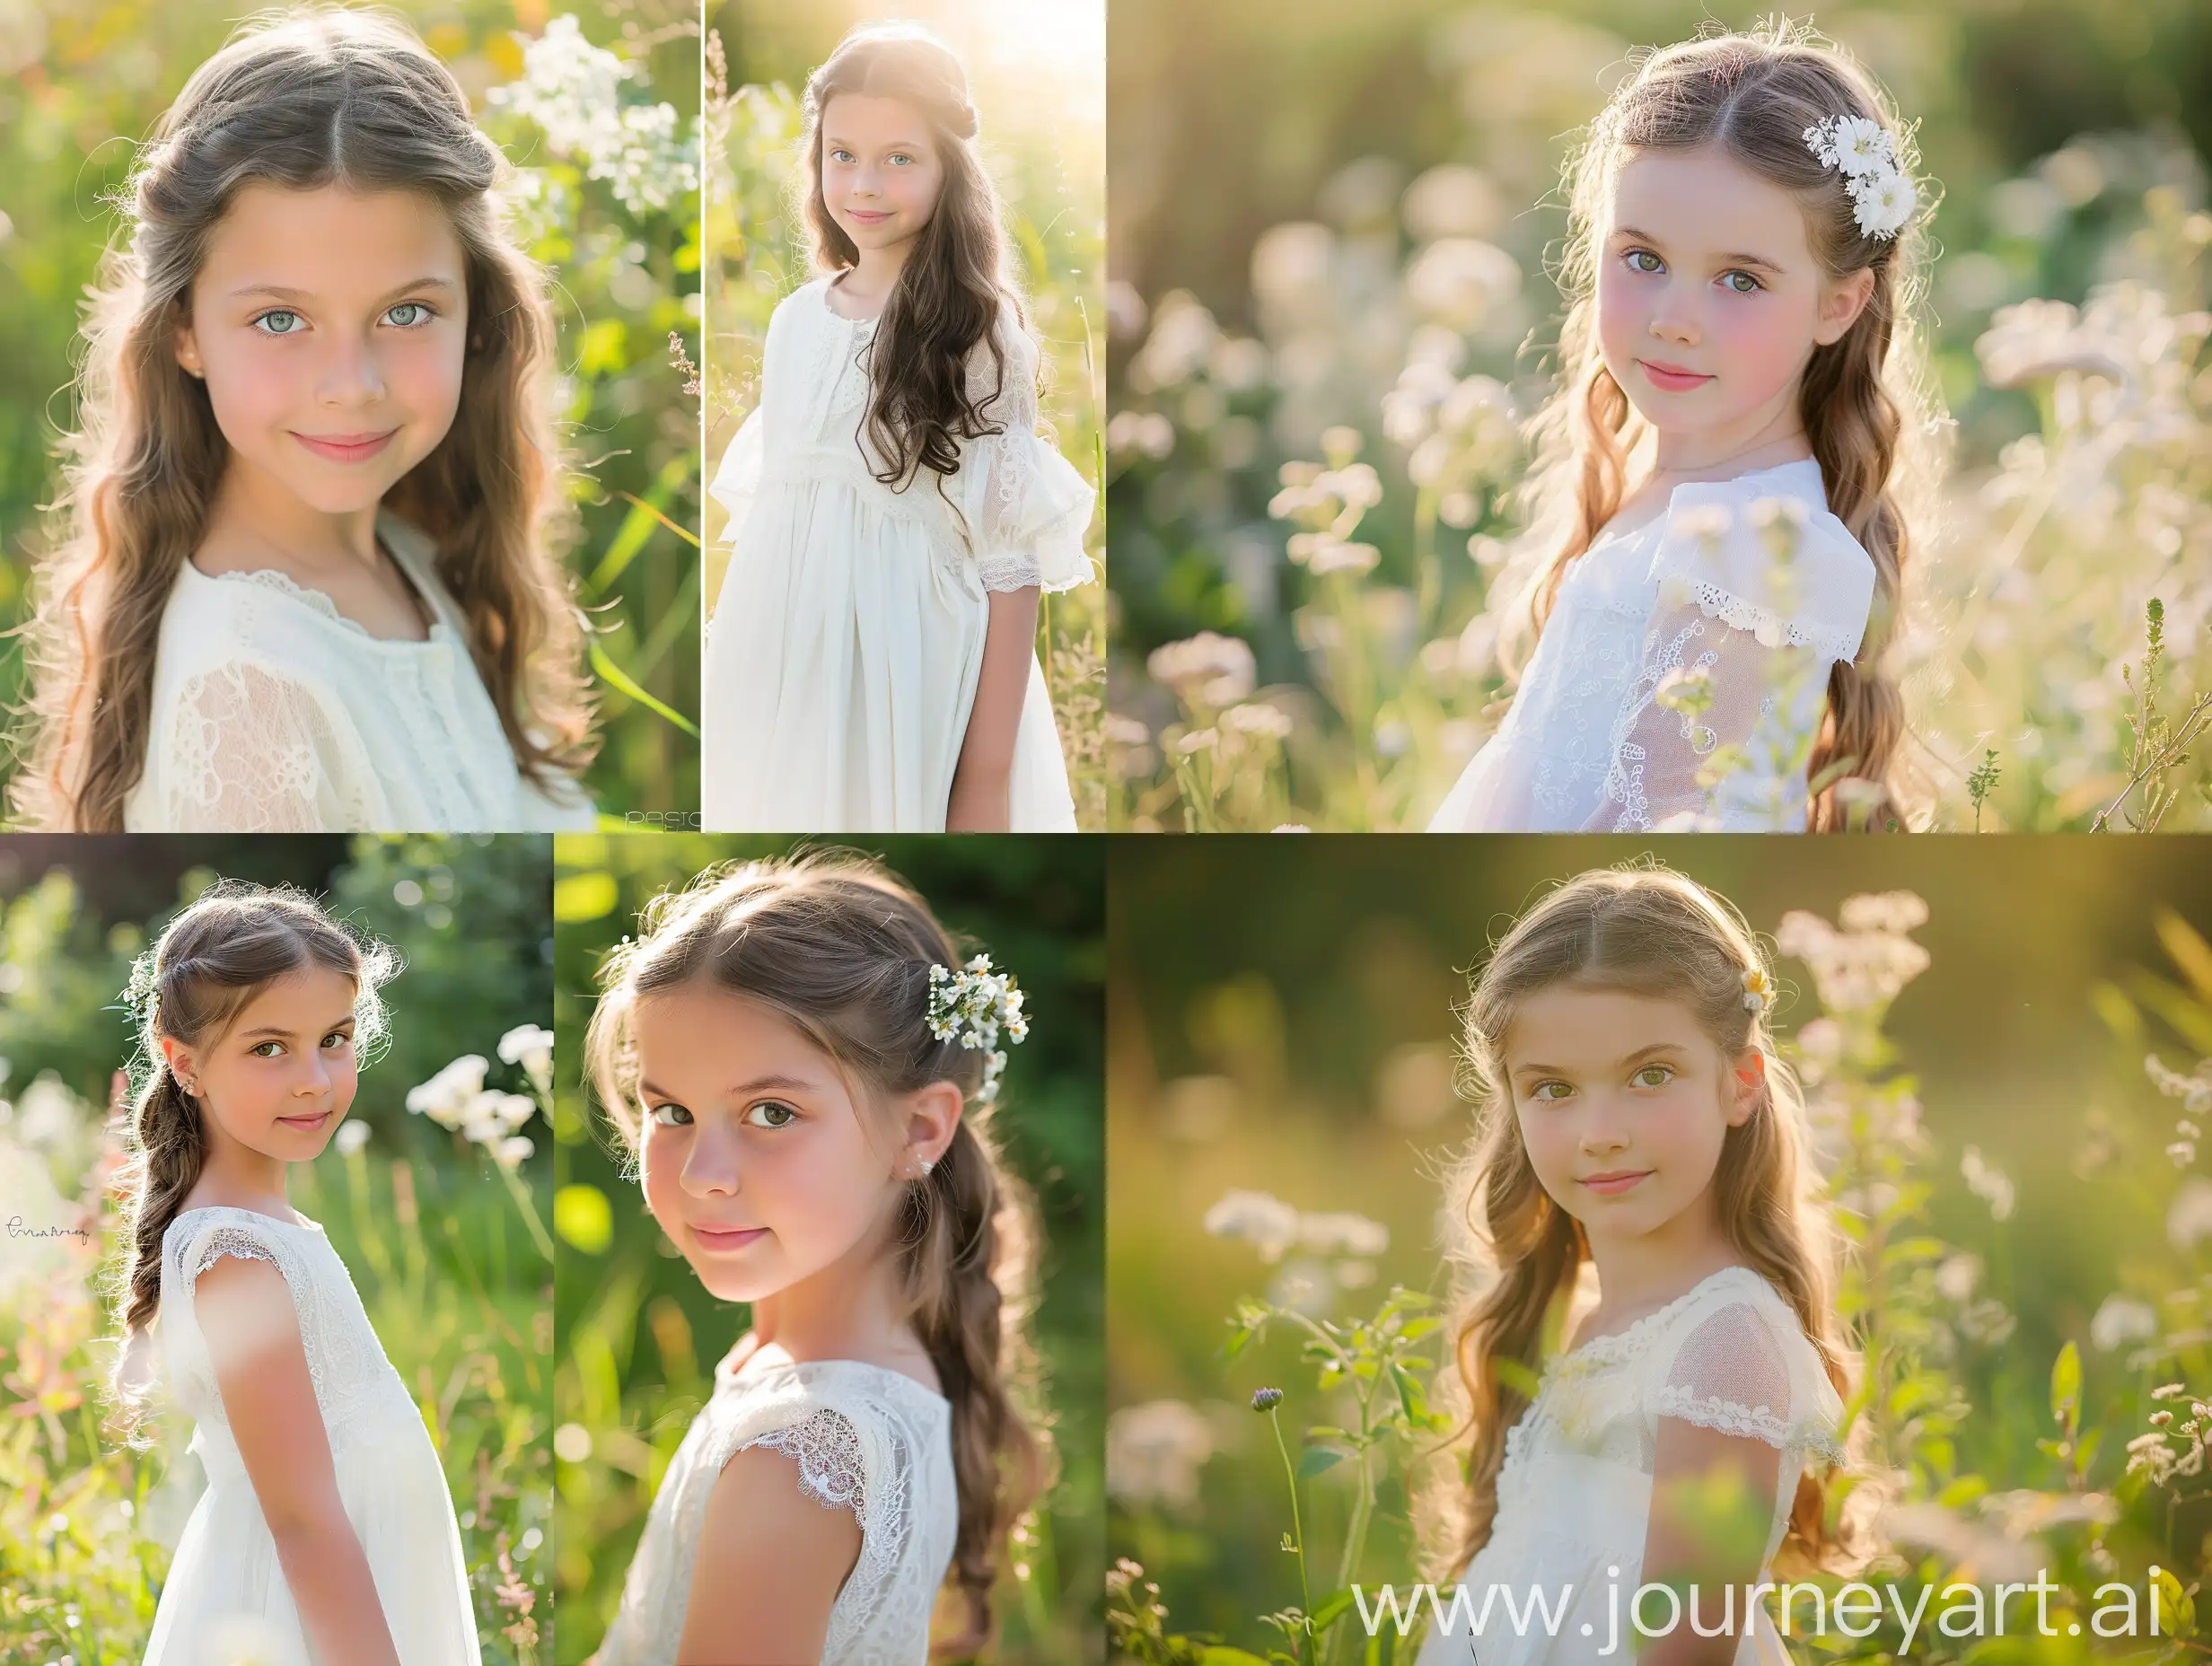 Outdoor-First-Communion-Portrait-Beautiful-Girl-in-White-Dress-Amid-Morning-Meadow